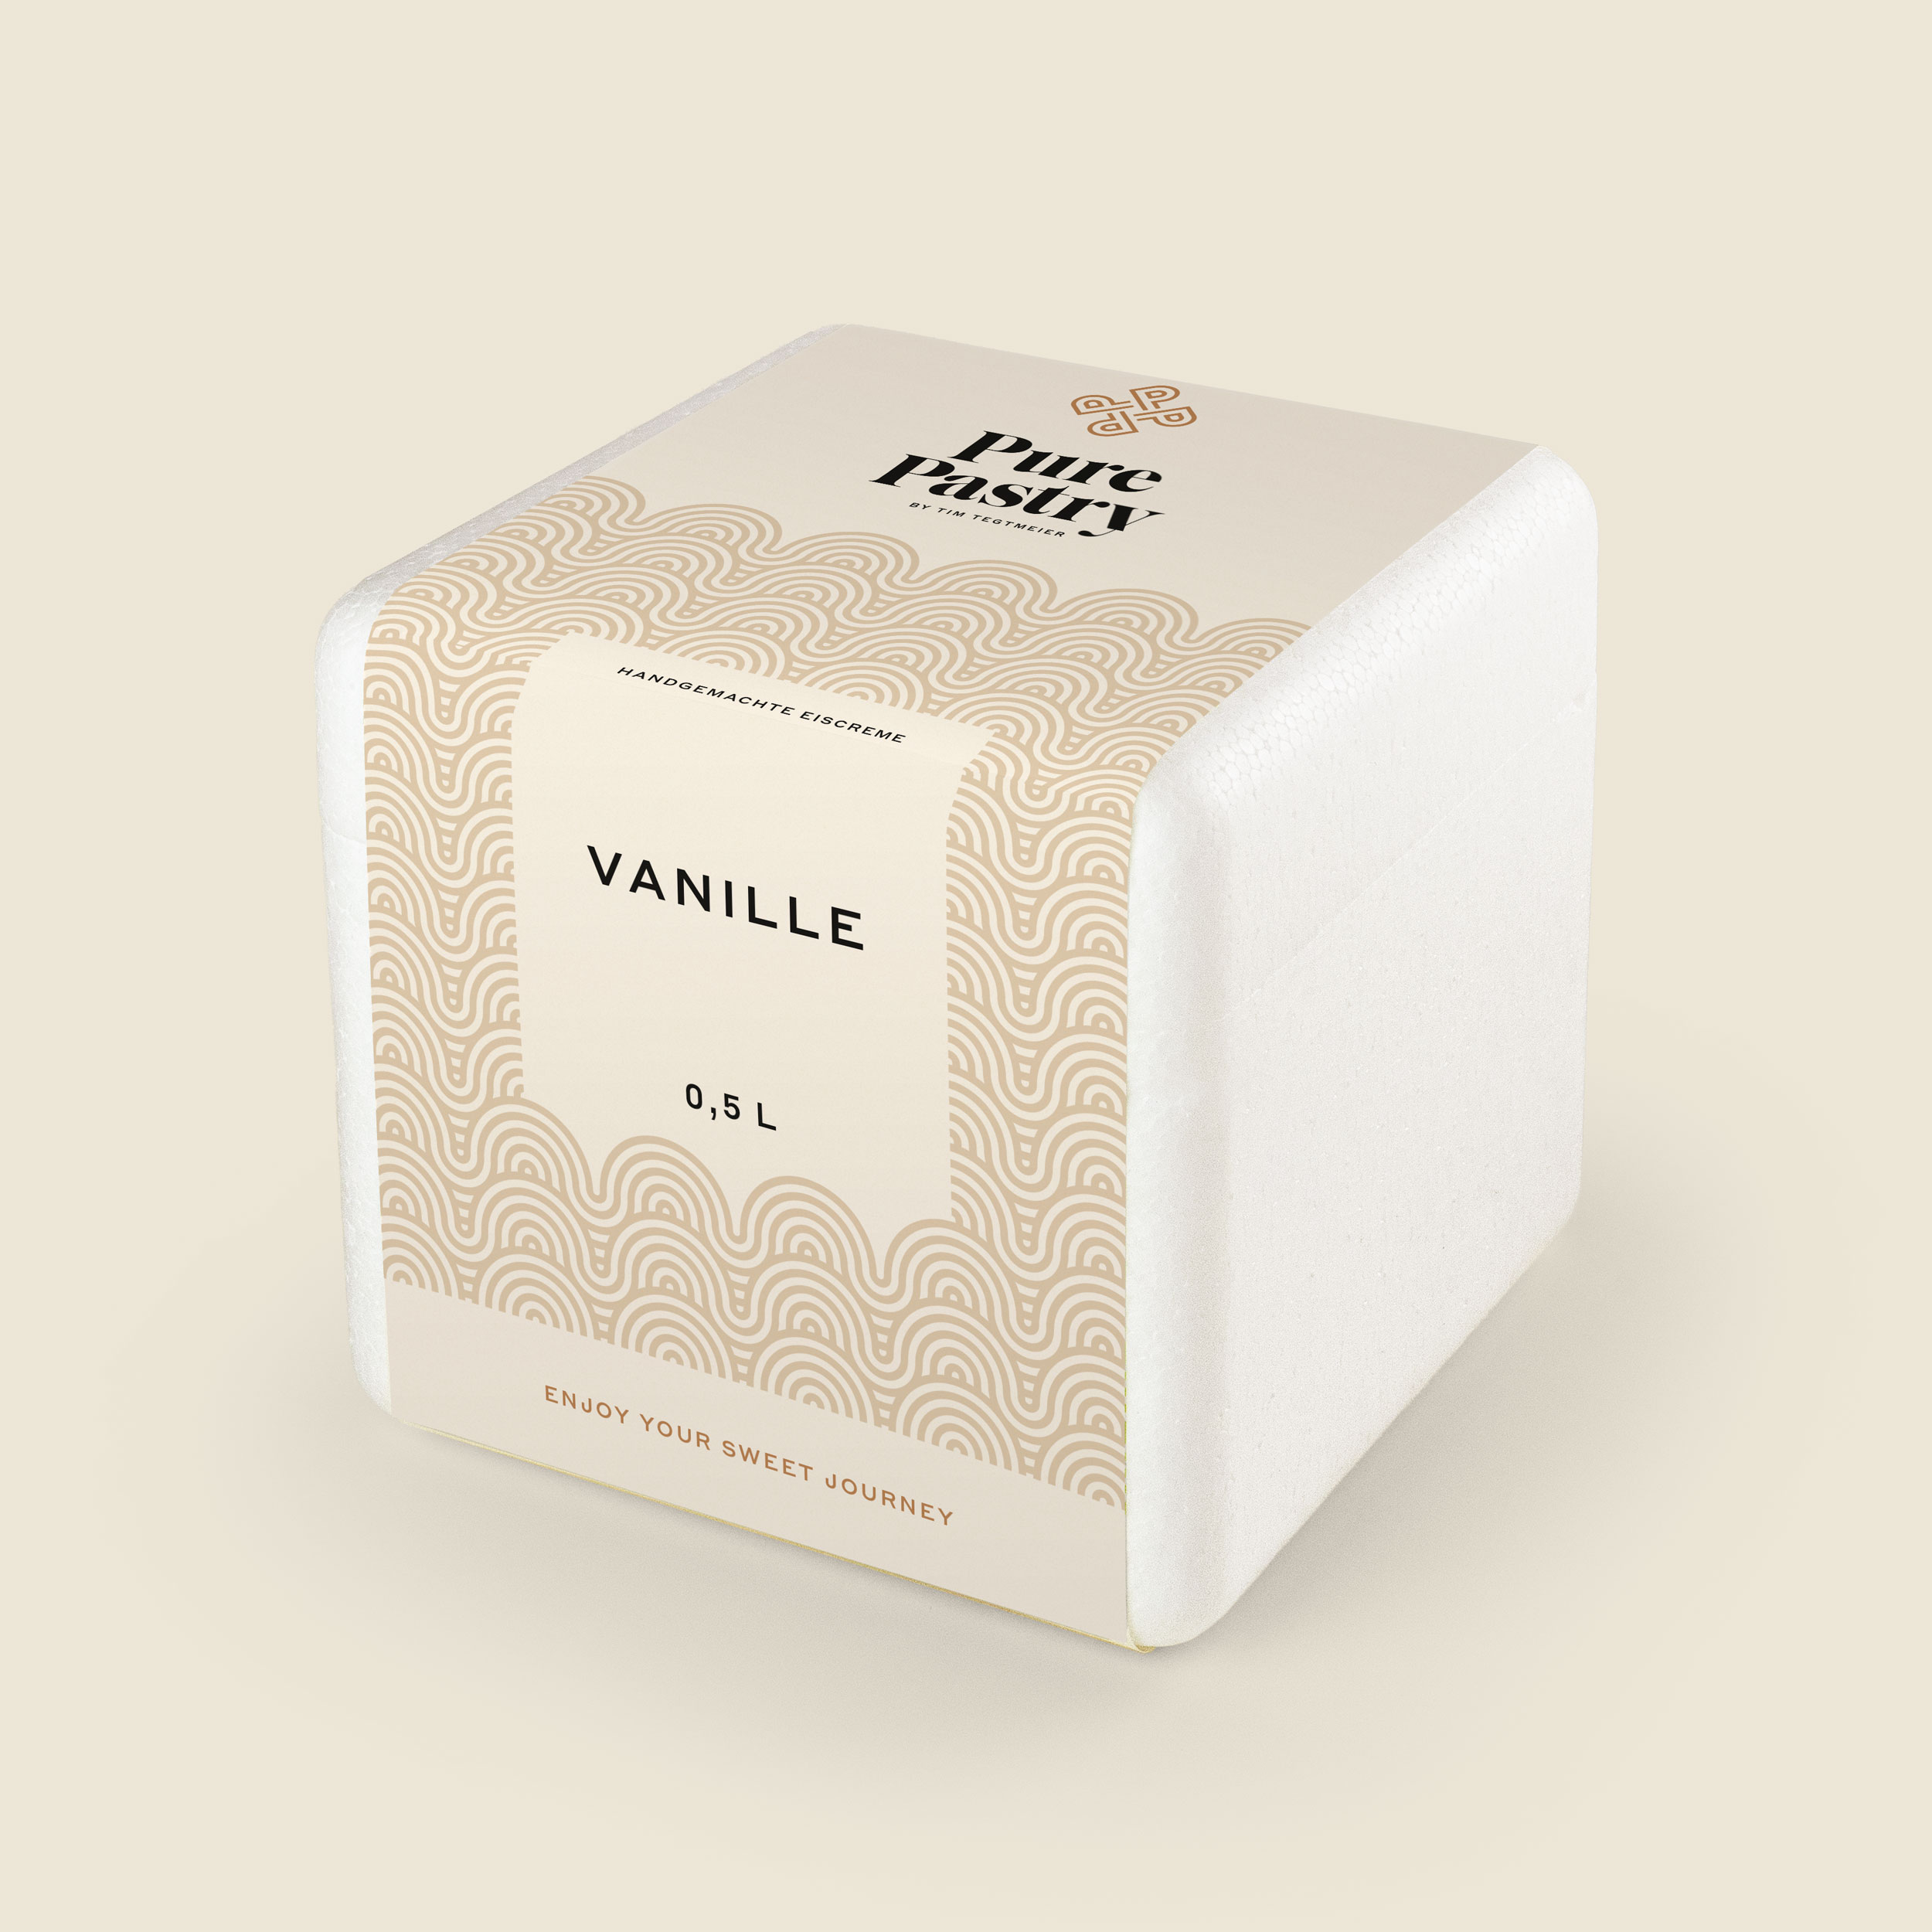 Vanille-Eis – Pastry Pure